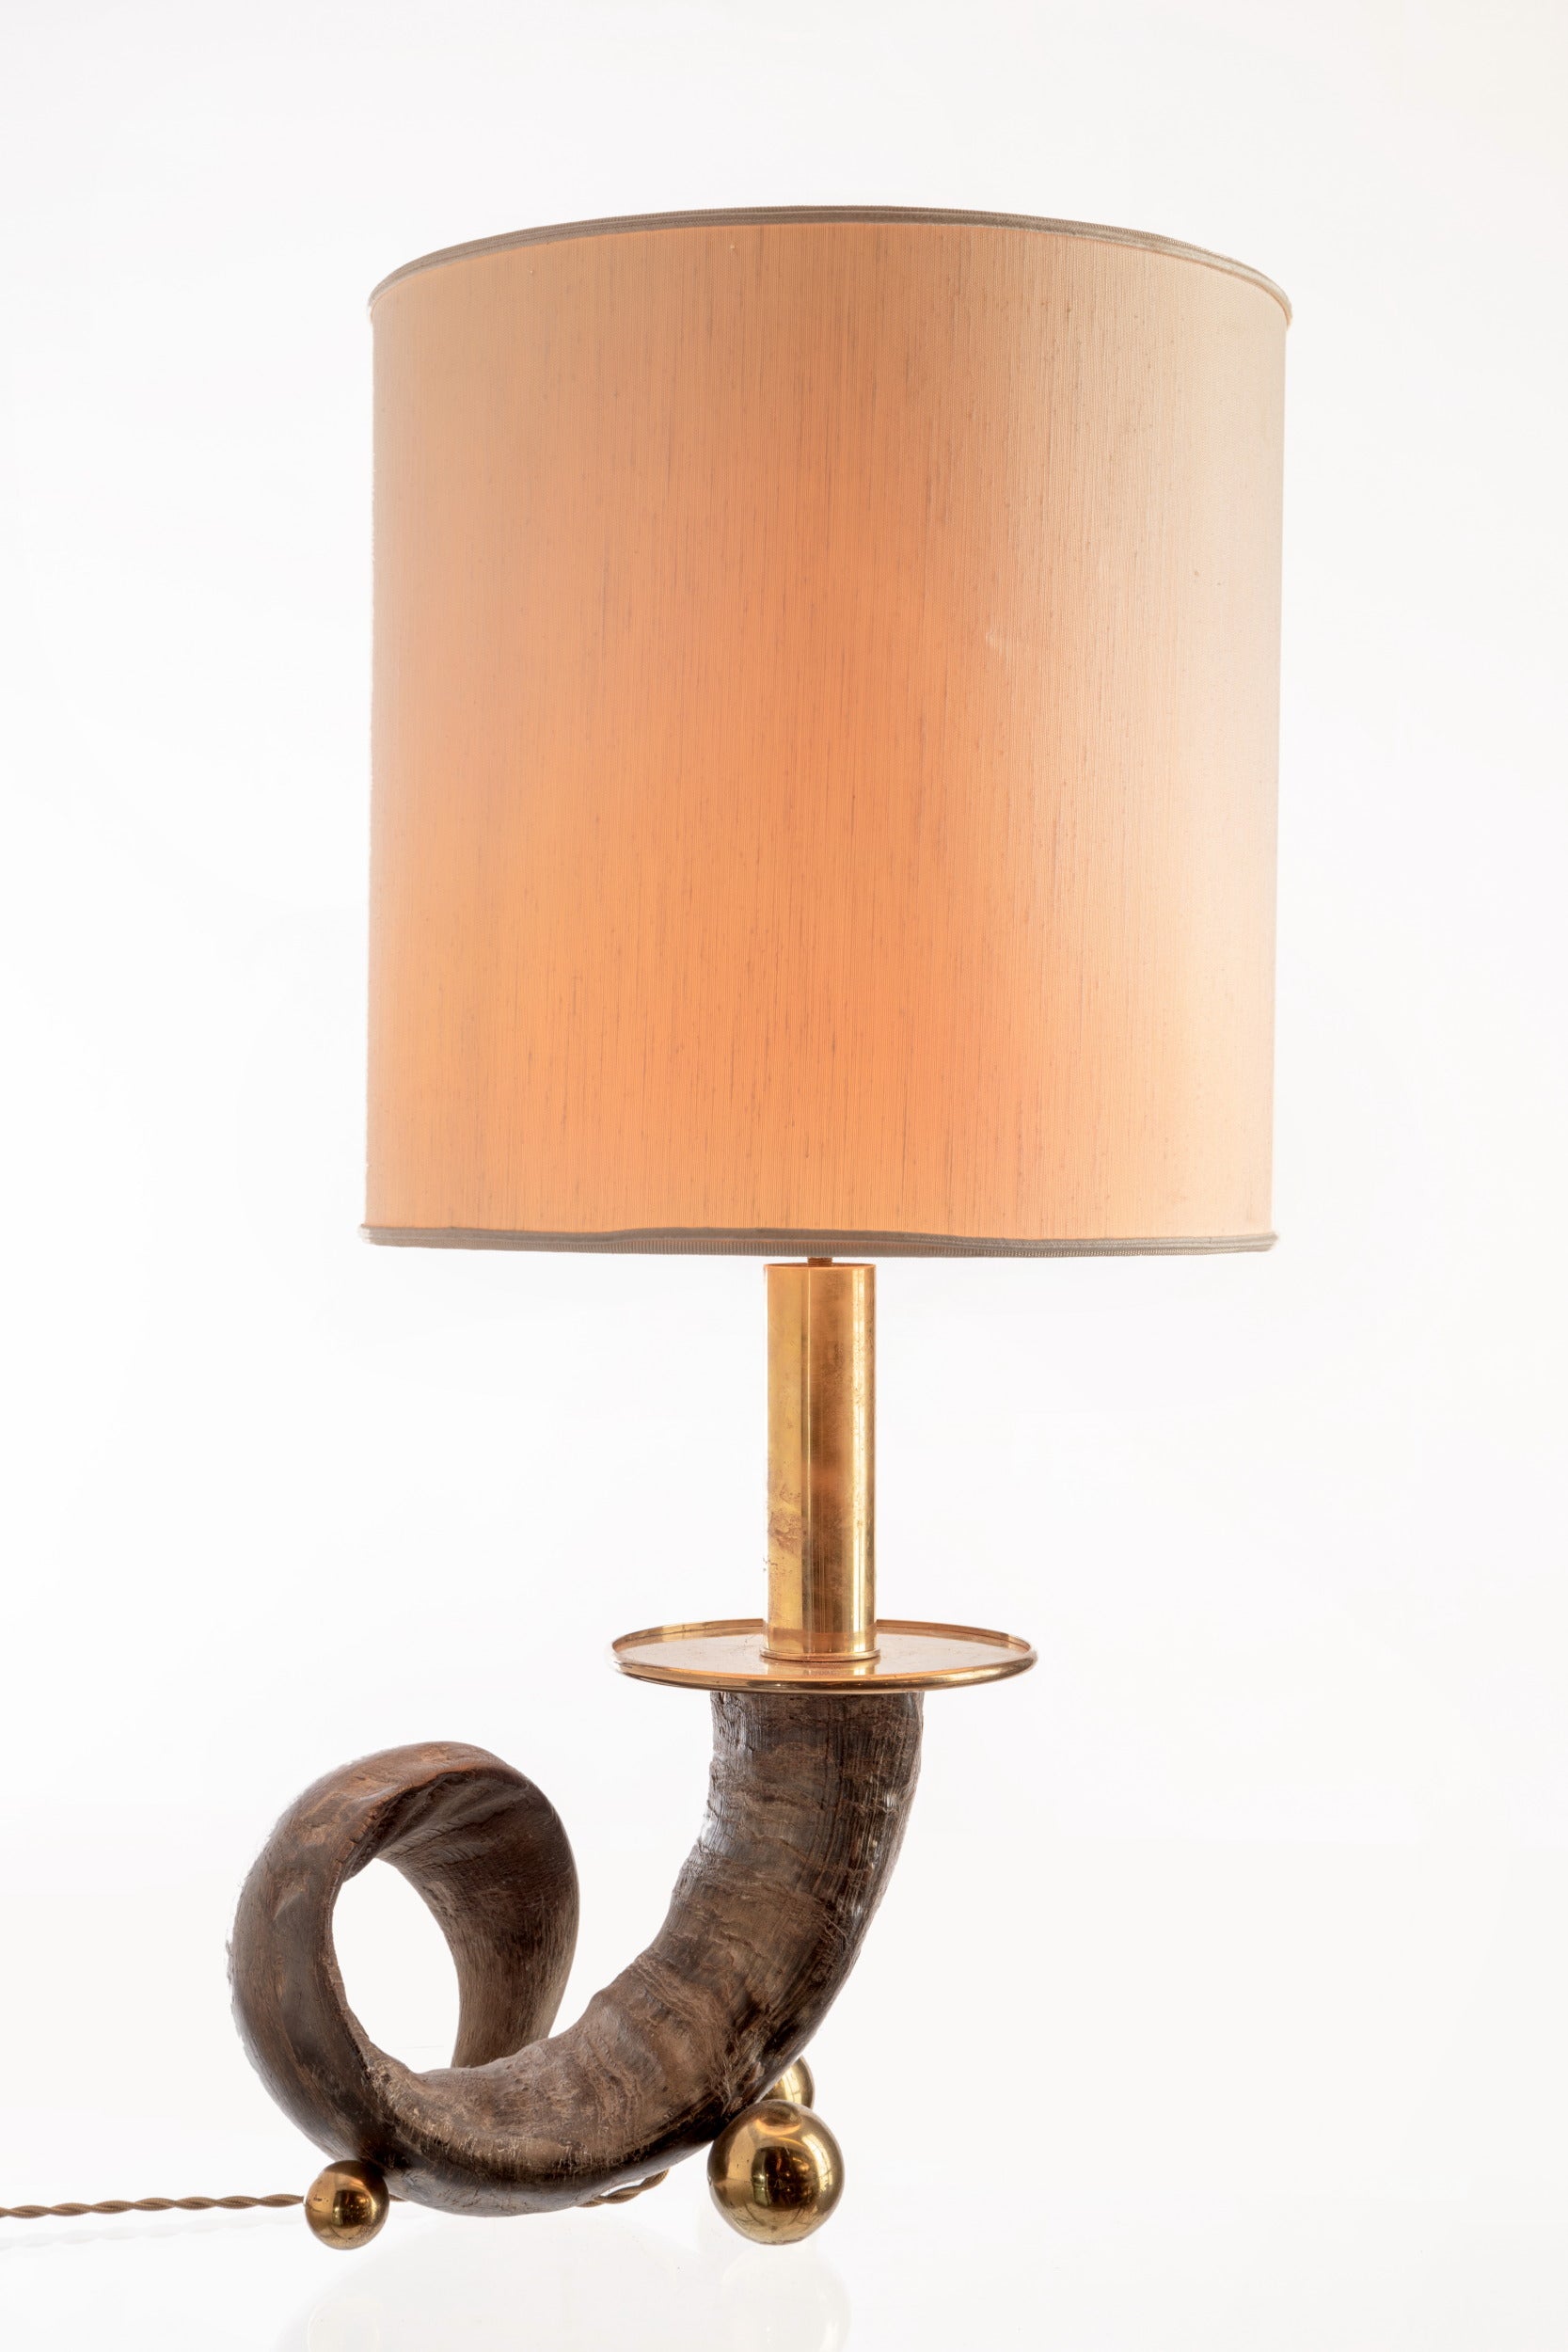 Gabriella Crespi horn lamp base from the 70s